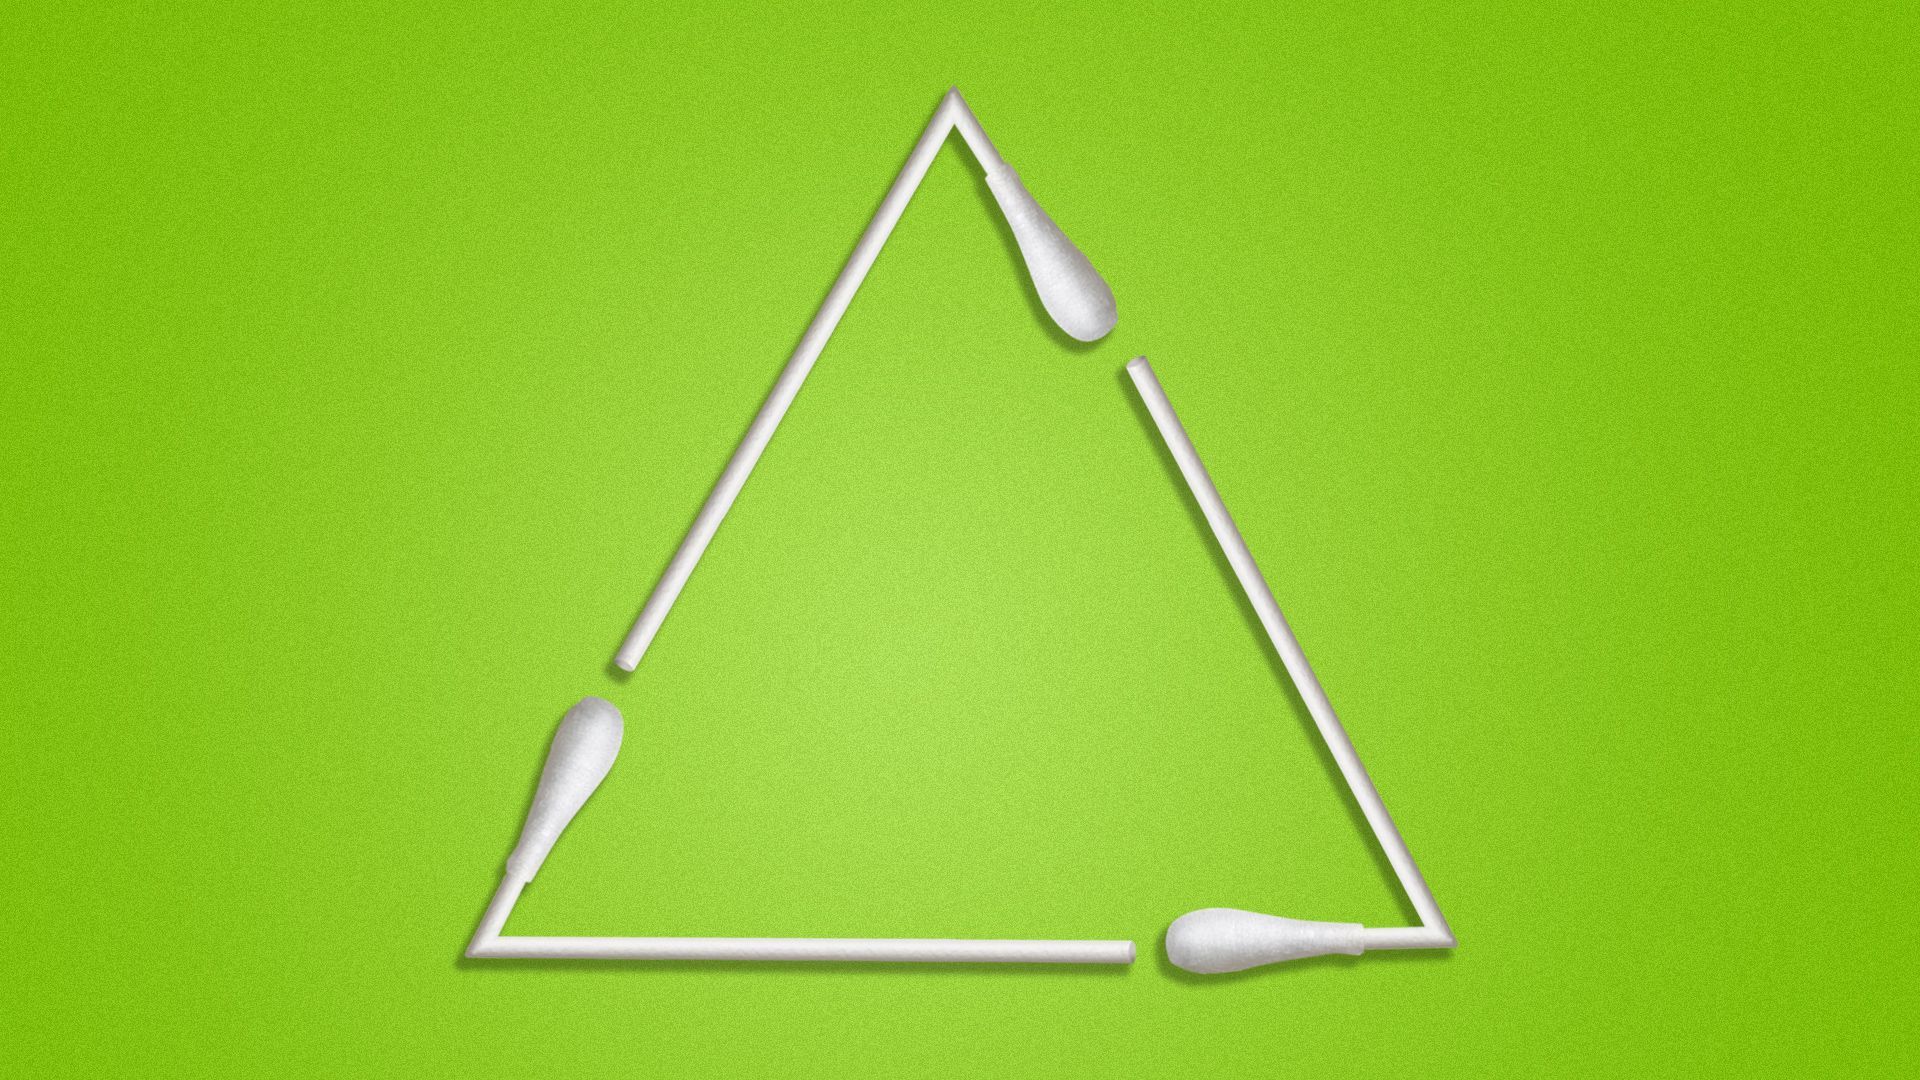 Illustration of cotton swabs folded to form a recycling symbol.   